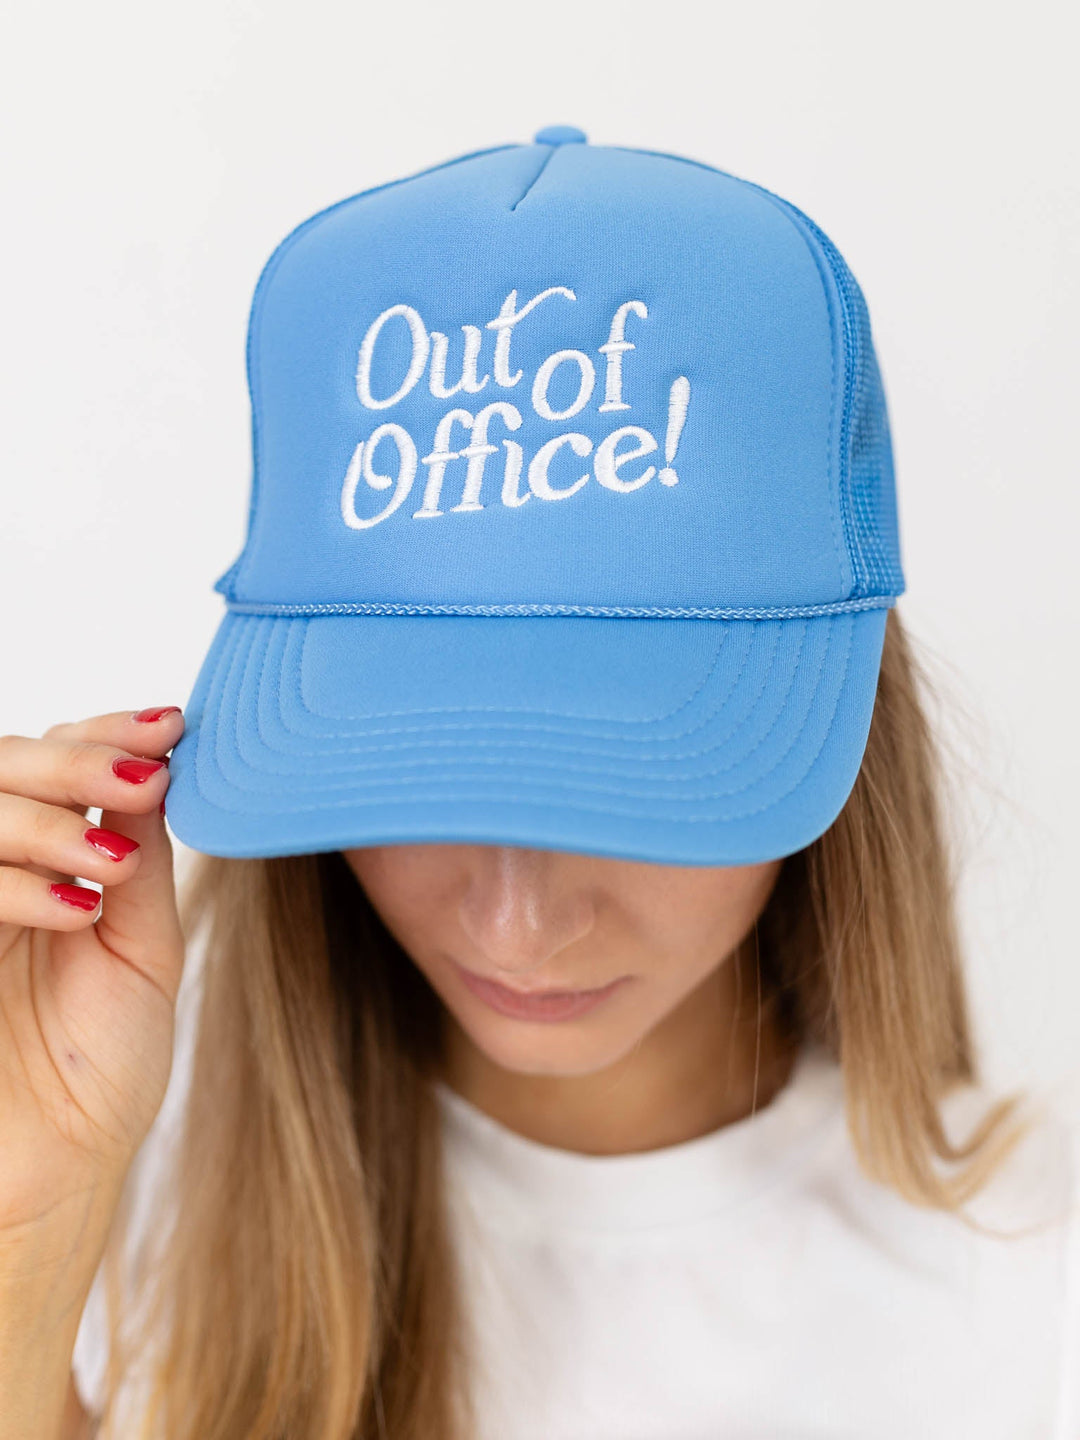 Out Of Office! Trucker HatHats